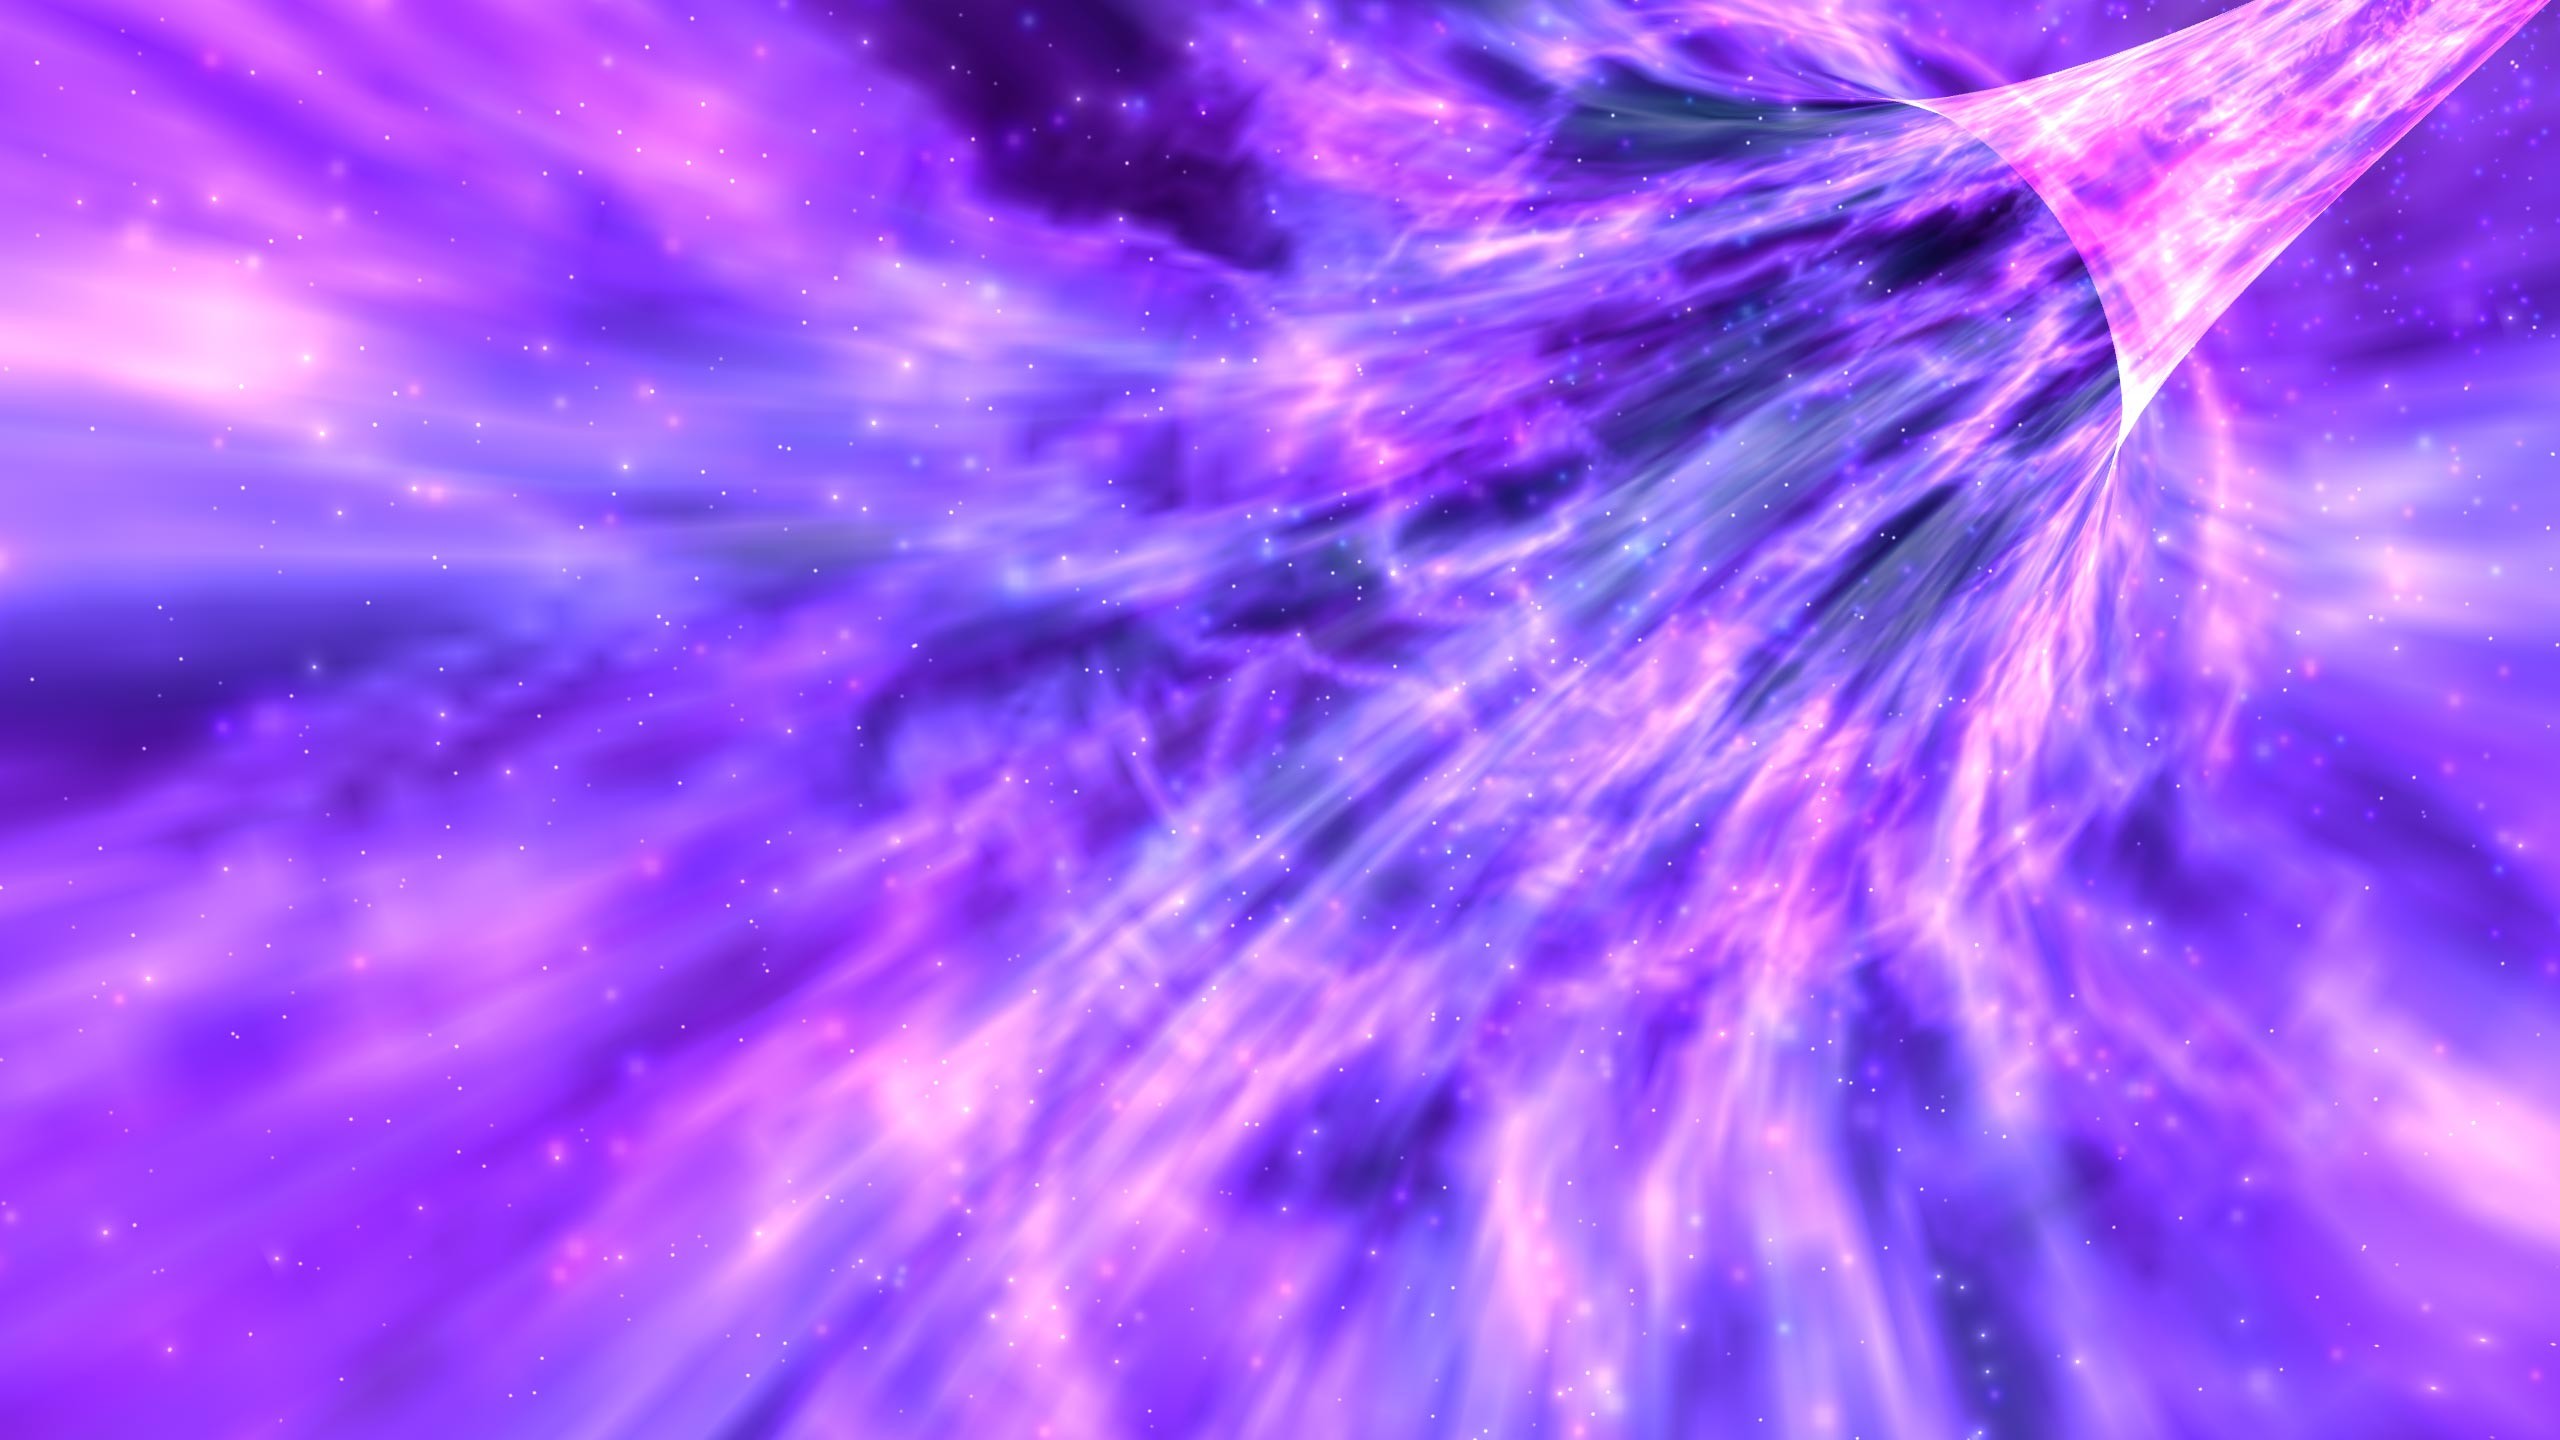 2560x1440 It's also an animated wallpaper which will animate your desktop wallpaper  with an effect of space wormhole.